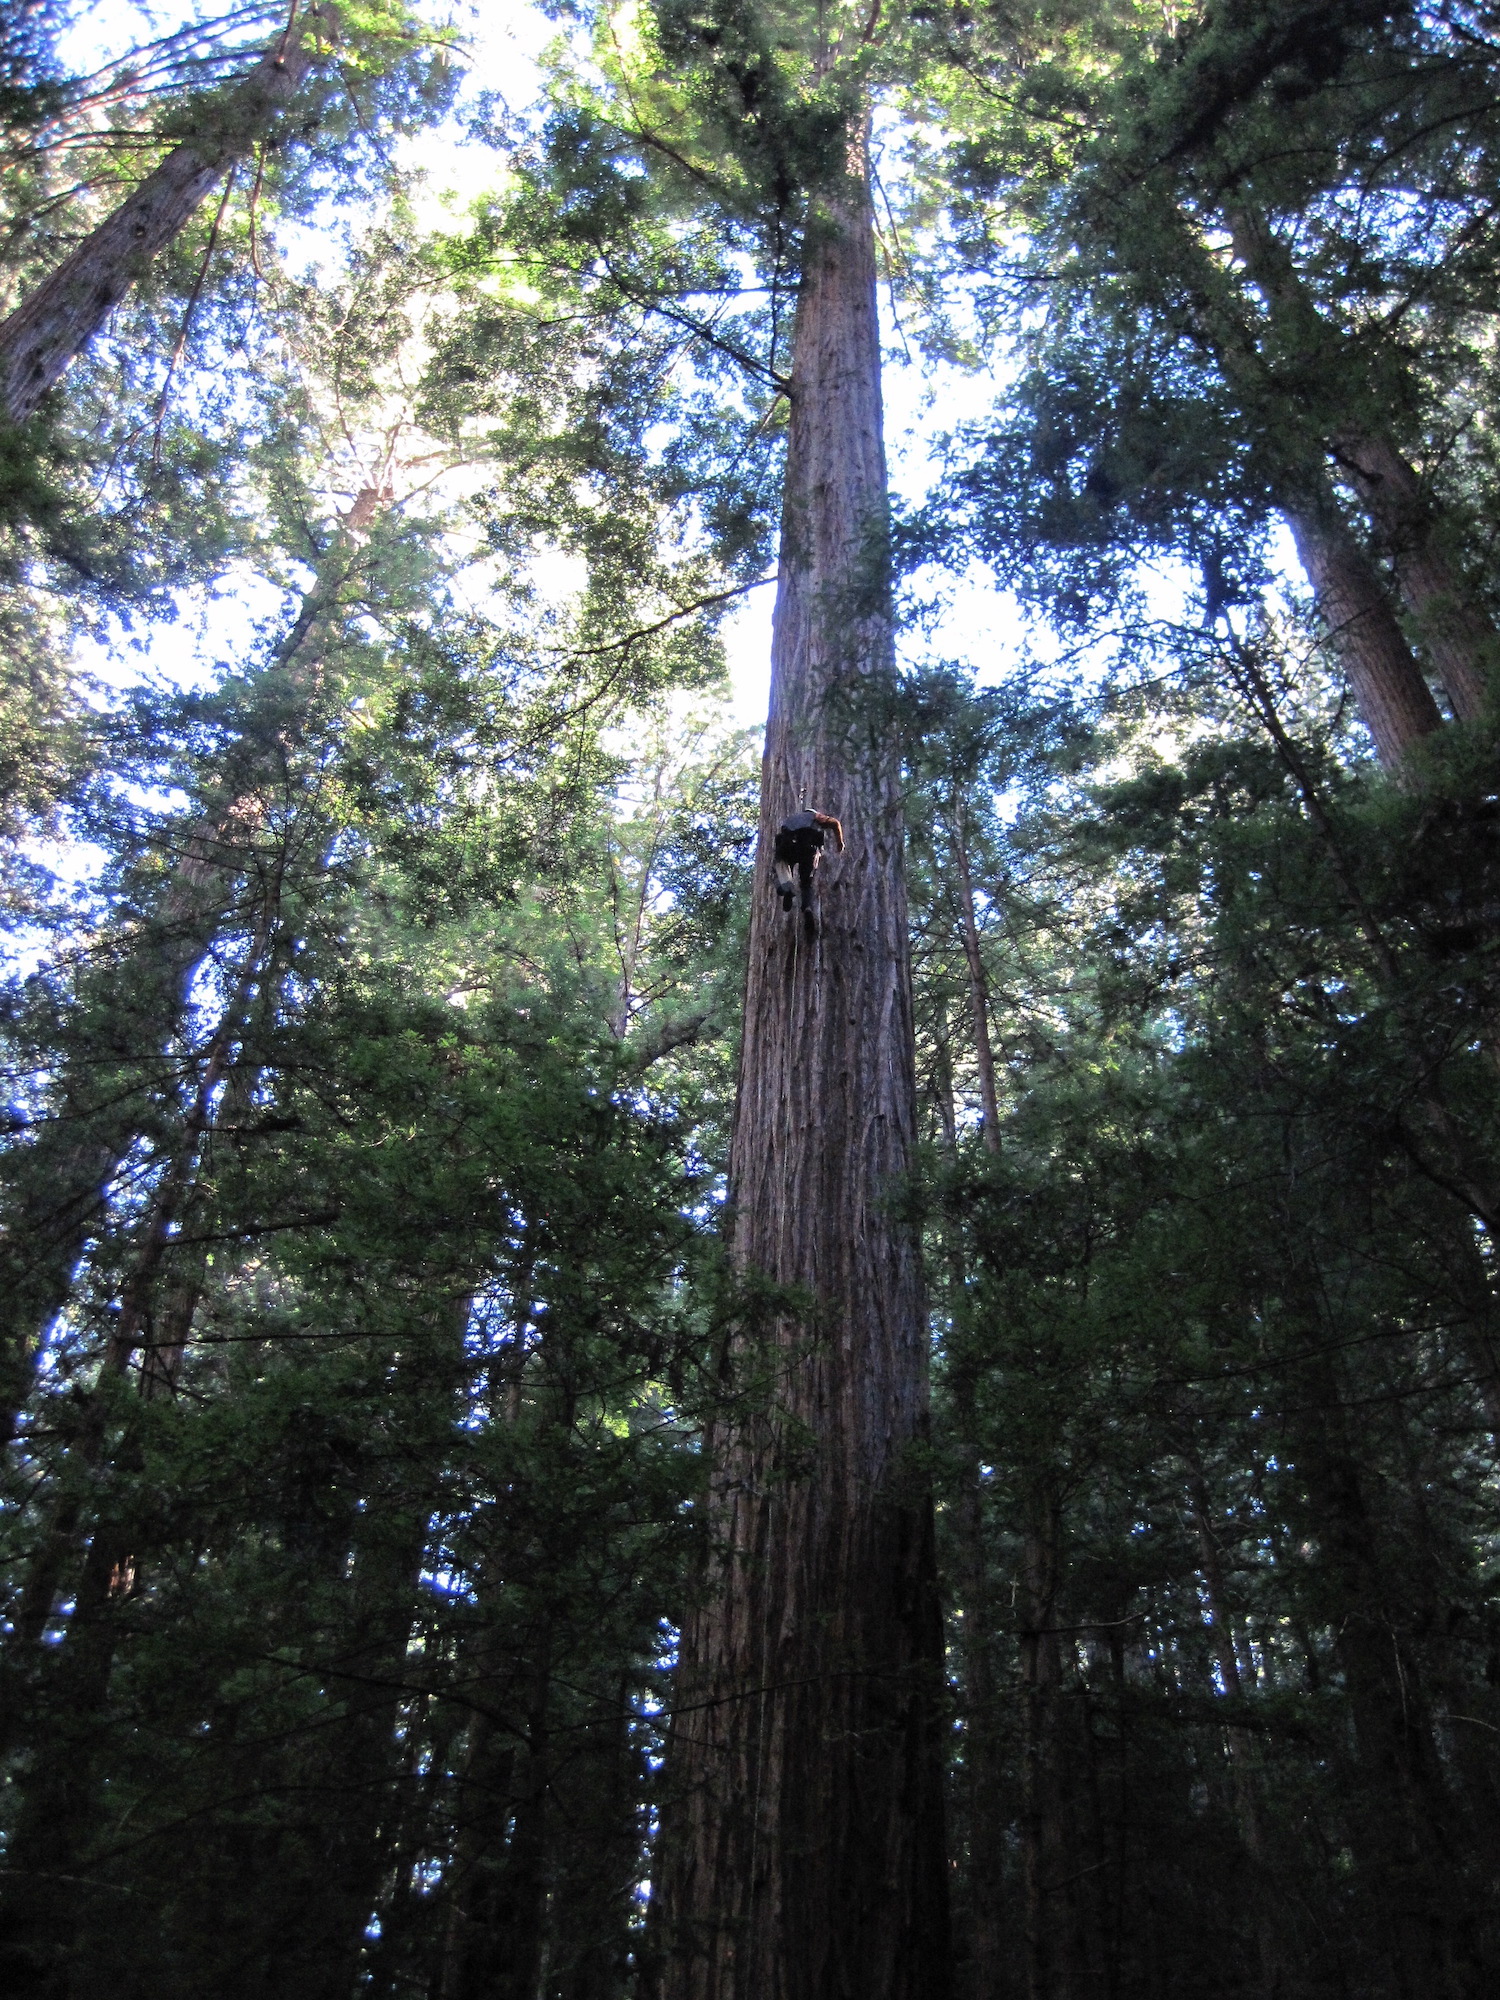 A scientist from the Sillett lab at Cal Poly Humboldt climbs a redwood tree to survey it. (Alana Chin/UC Davis)